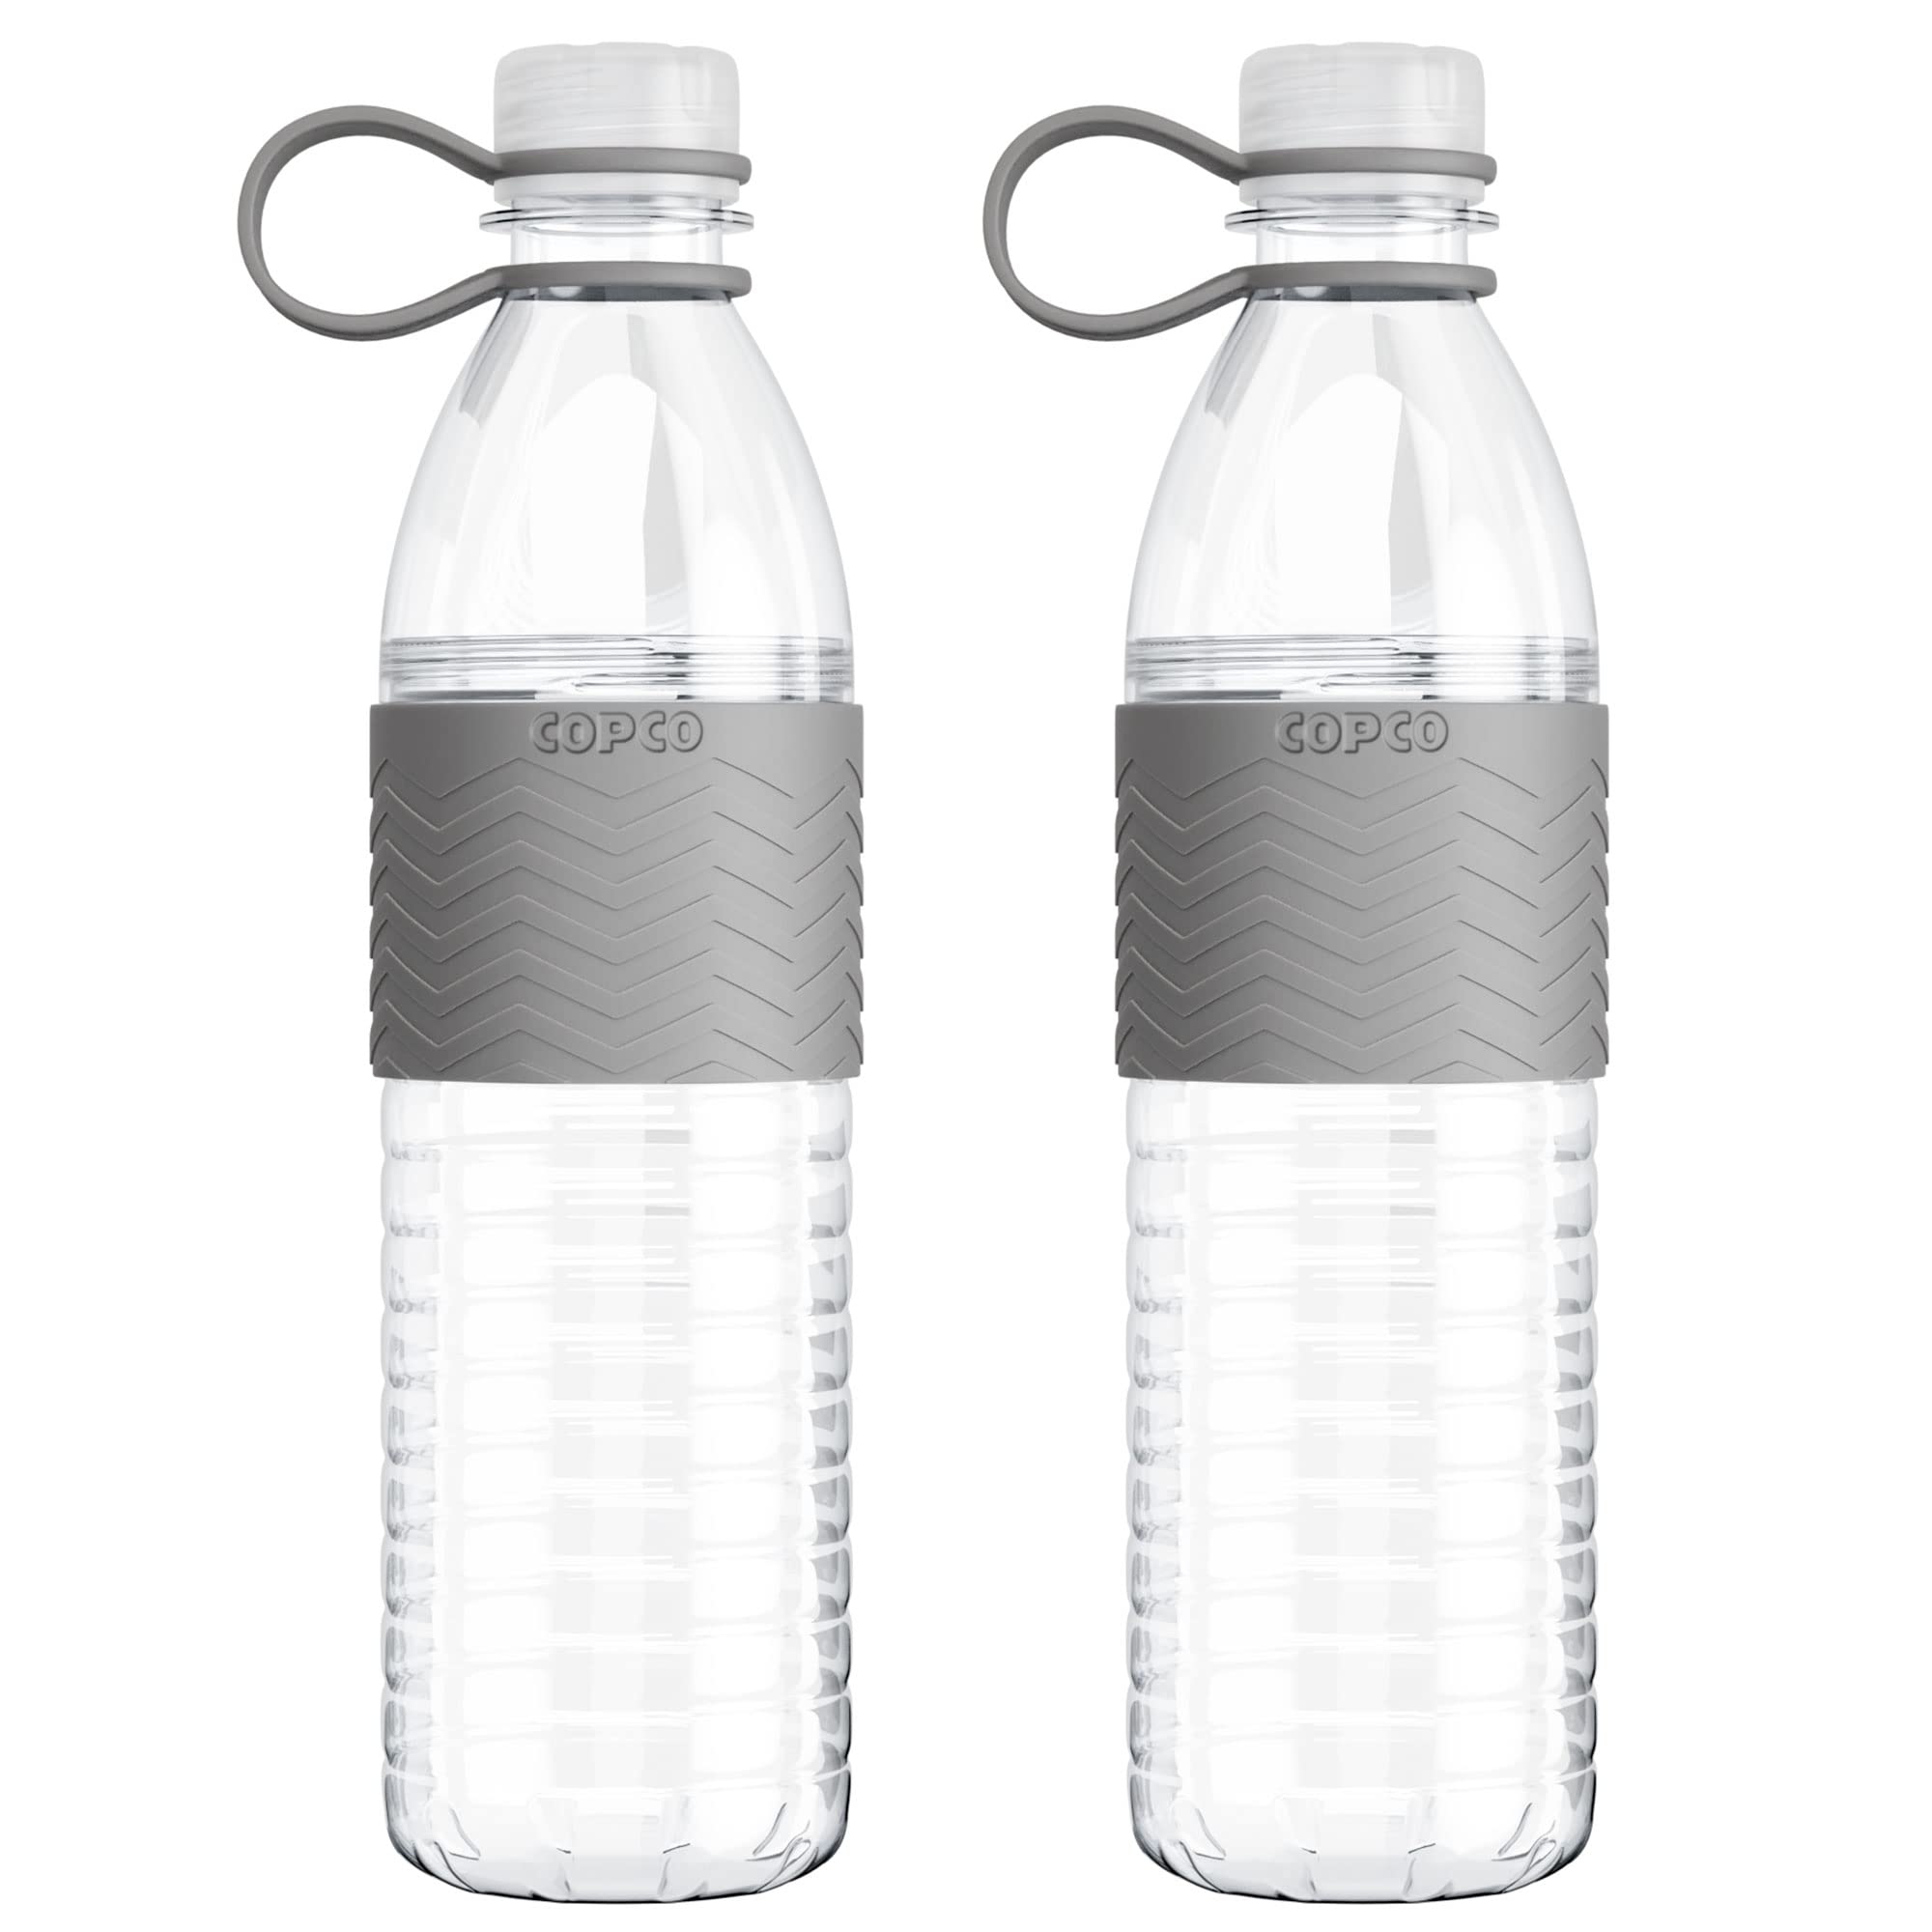 Hydrate Bottles - The Ultimate Bottle Collection – Hydrate-bottles